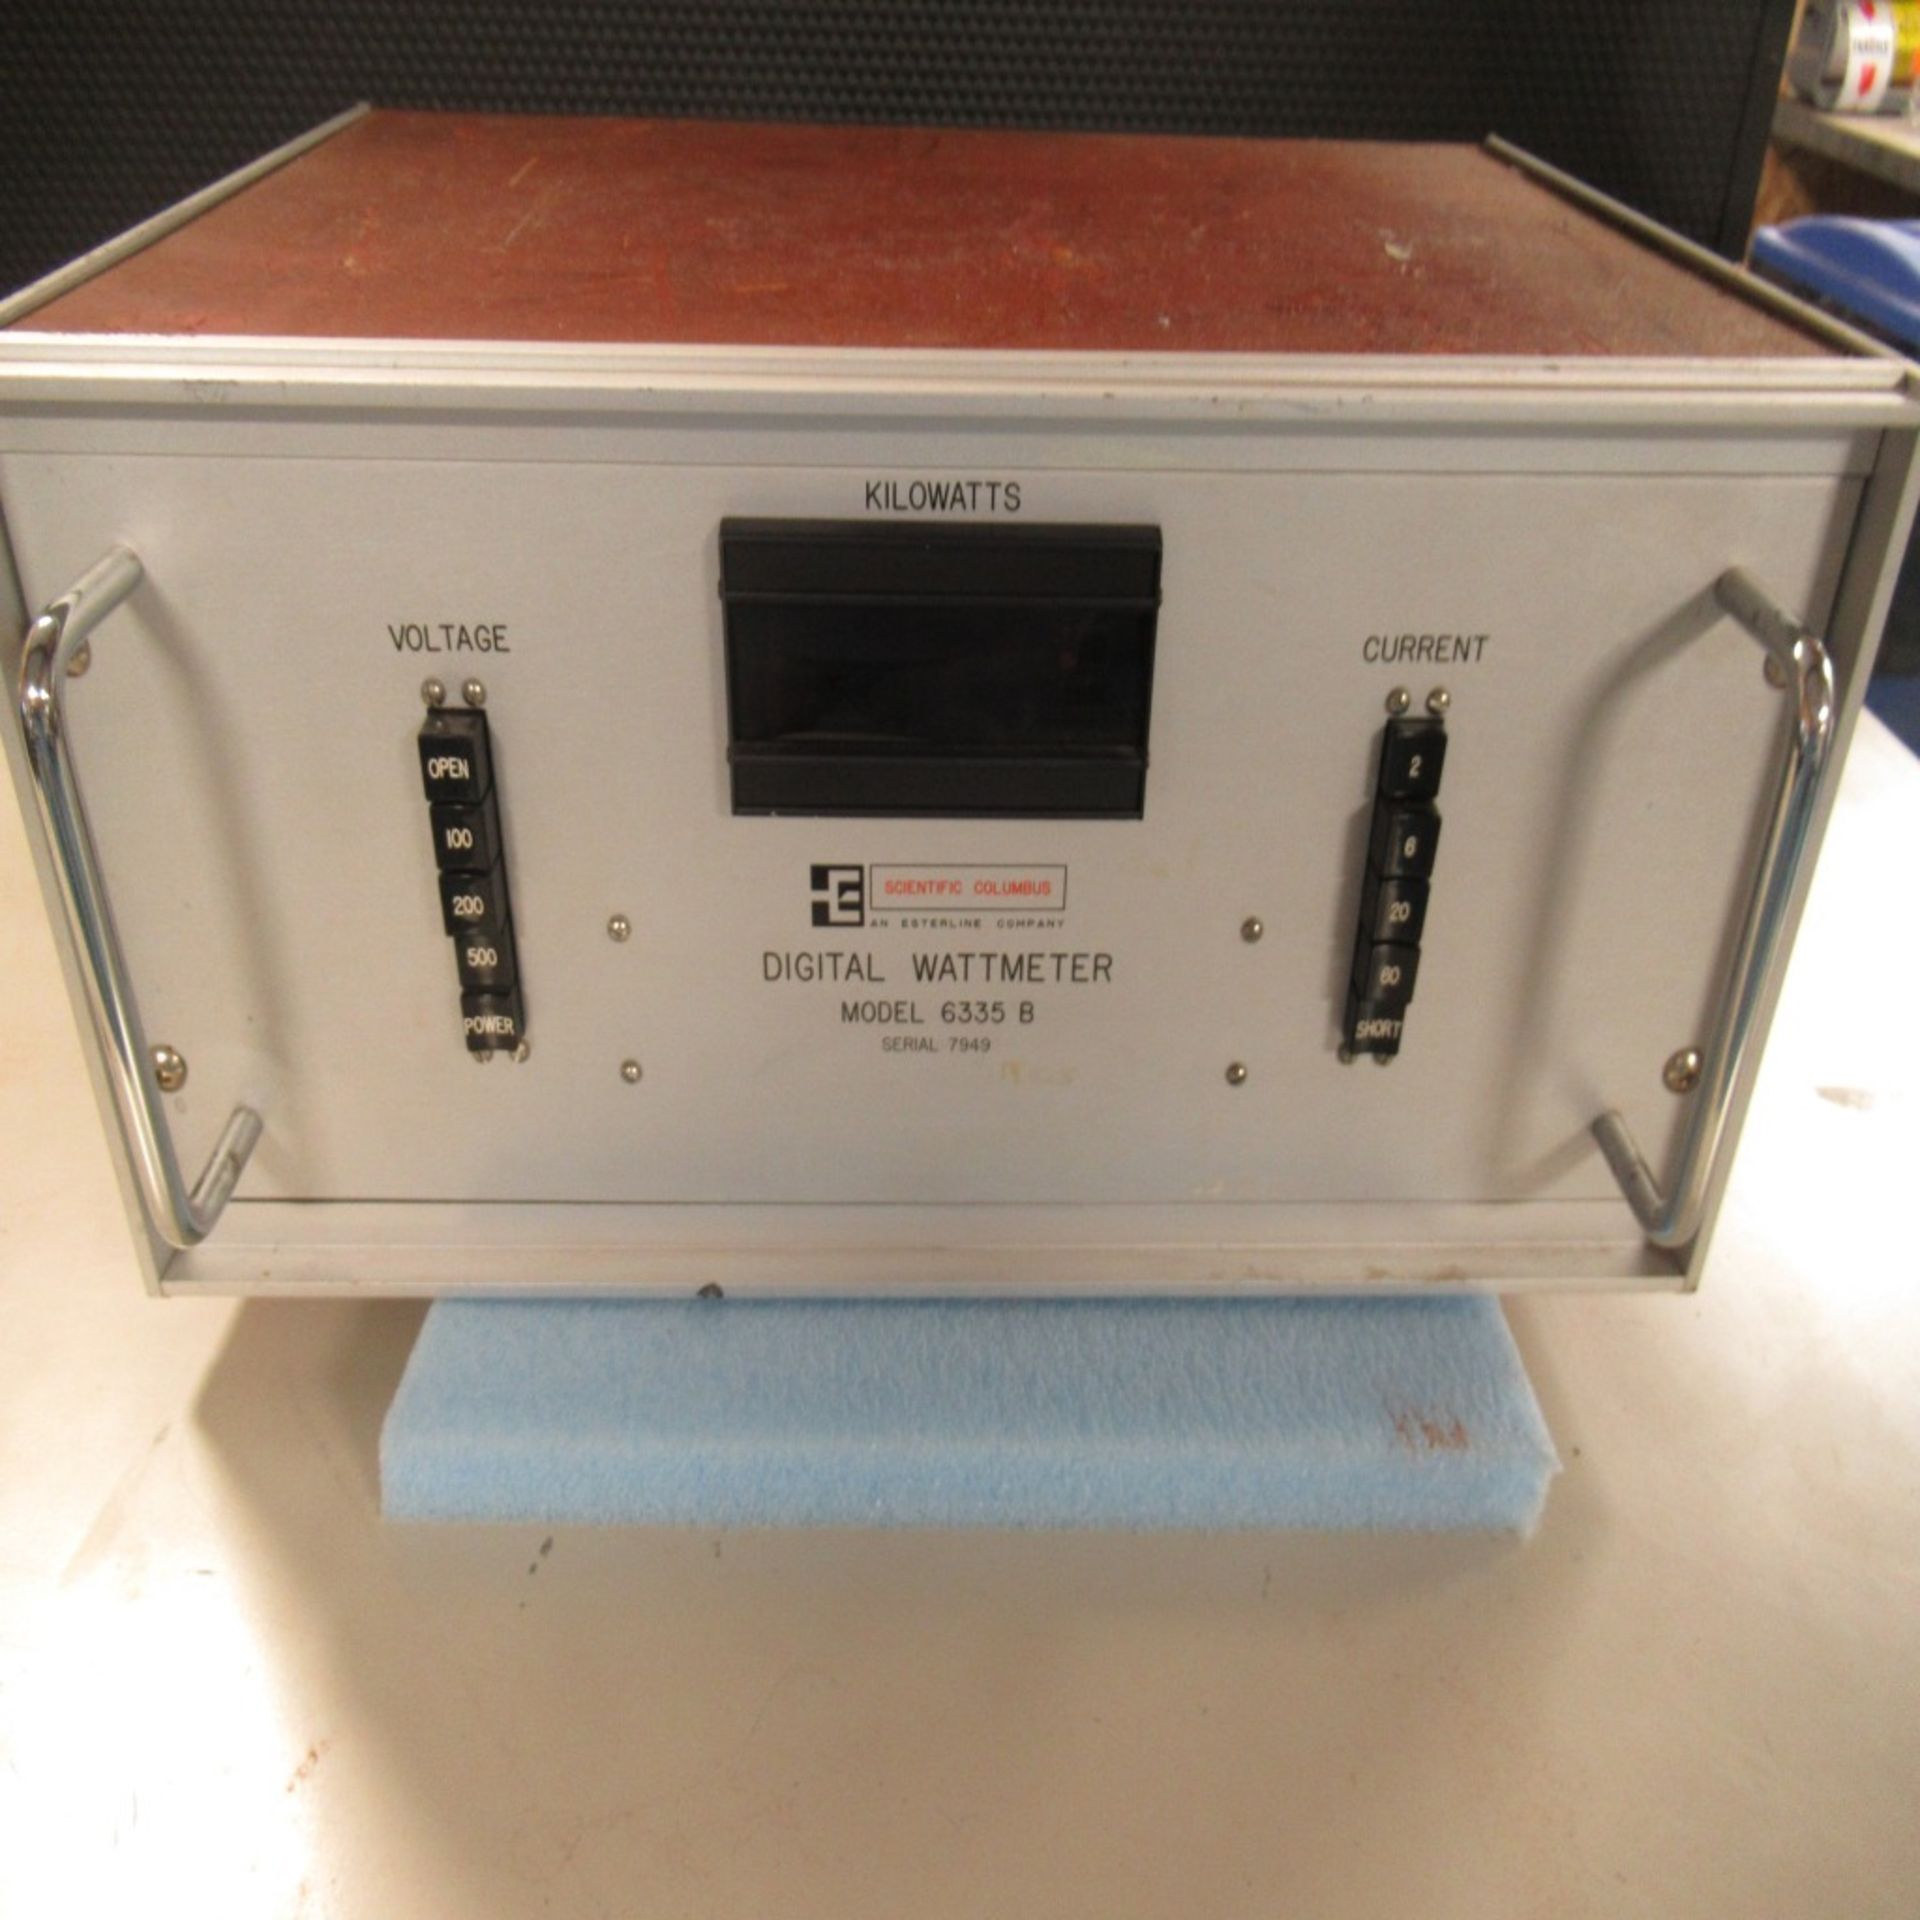 PHOTON SNAP SHOT MODEL 6000 *POWERS ON* NO SCREEN DISPLAY; FARNELL AP20-80 REGULATED POWER SUPPLY * - Image 146 of 222